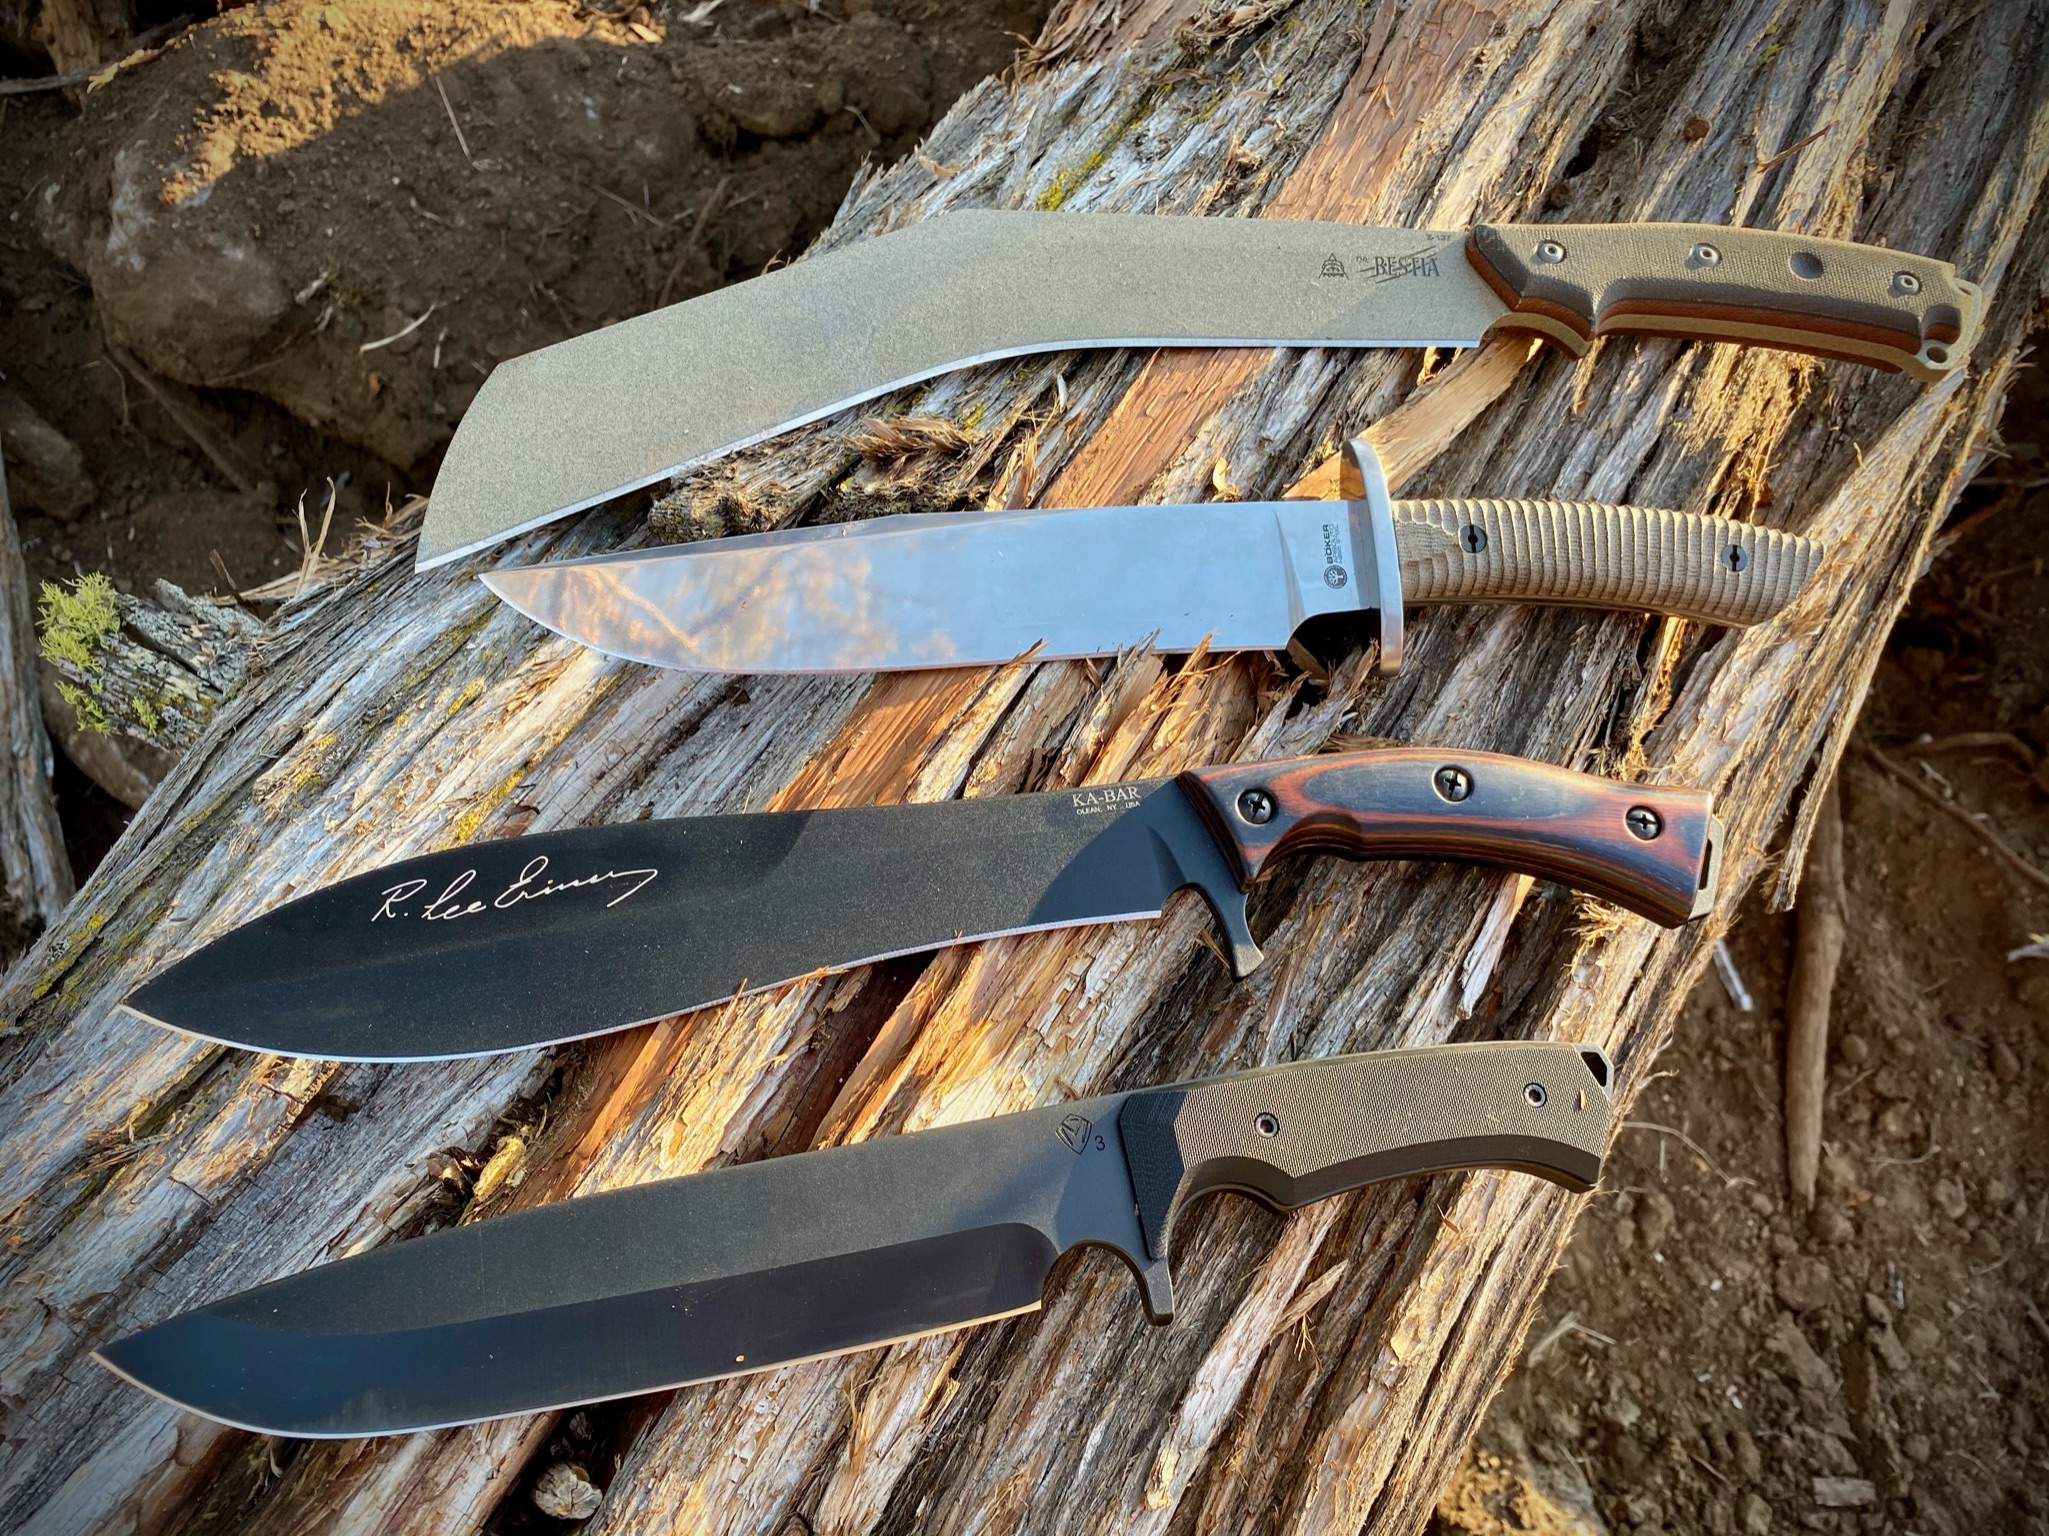 BIG Blades: 4 Monster Choppers for the Bush